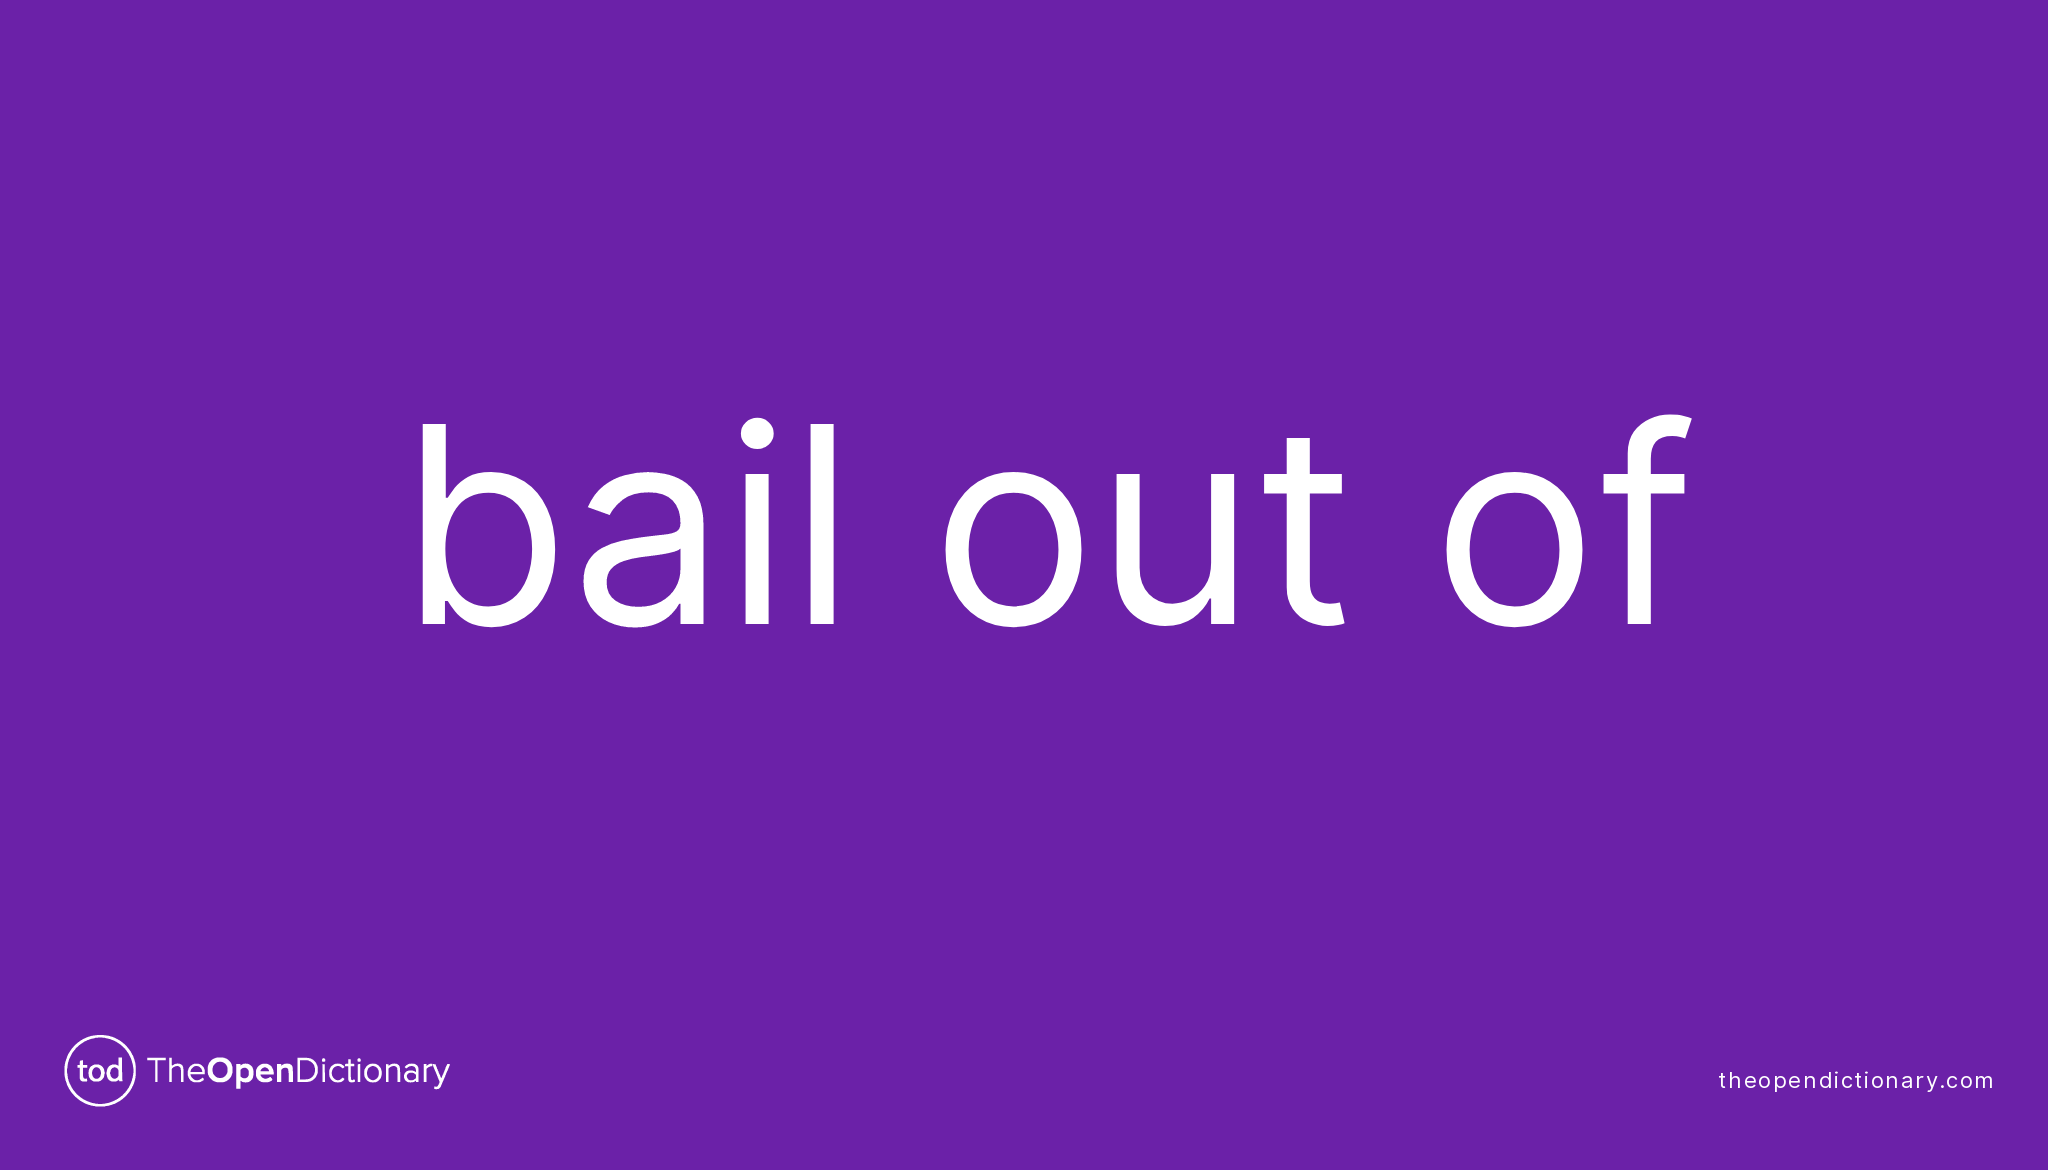 bail-out-of-phrasal-verb-bail-out-of-definition-meaning-and-example